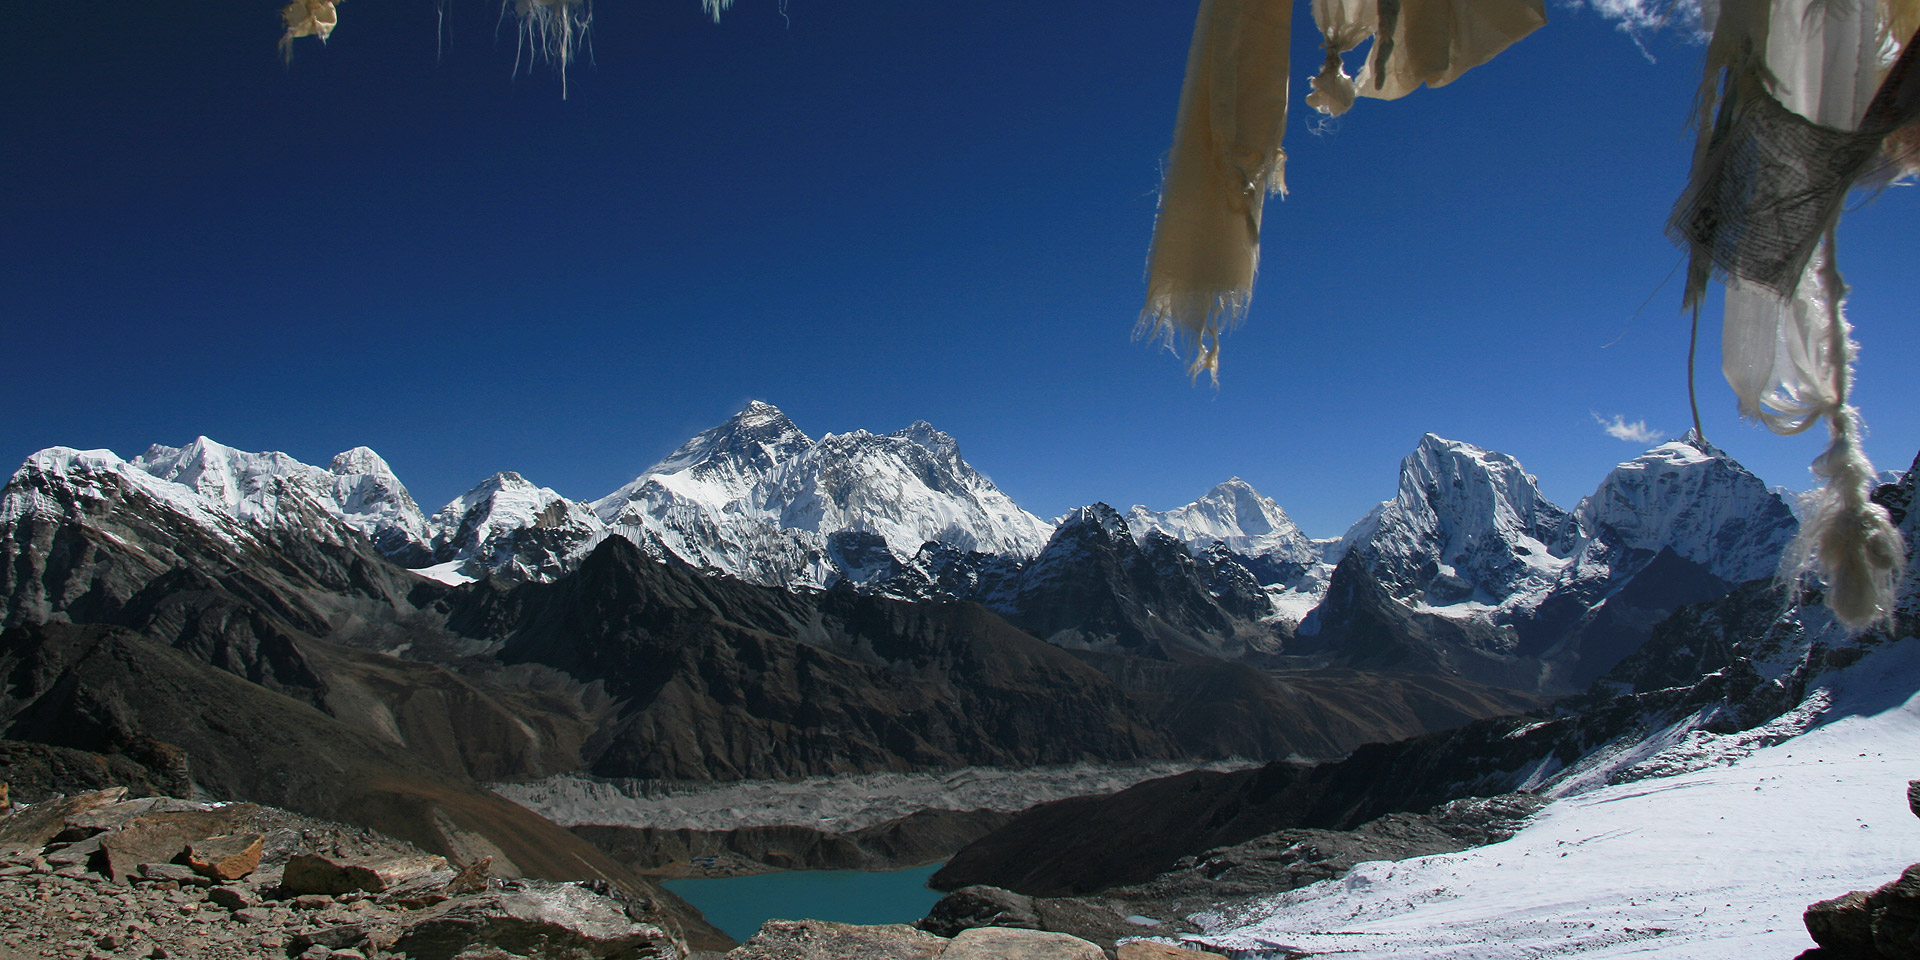 Renjo La view to Gokyo and Everest in the Khumbu region of Nepal